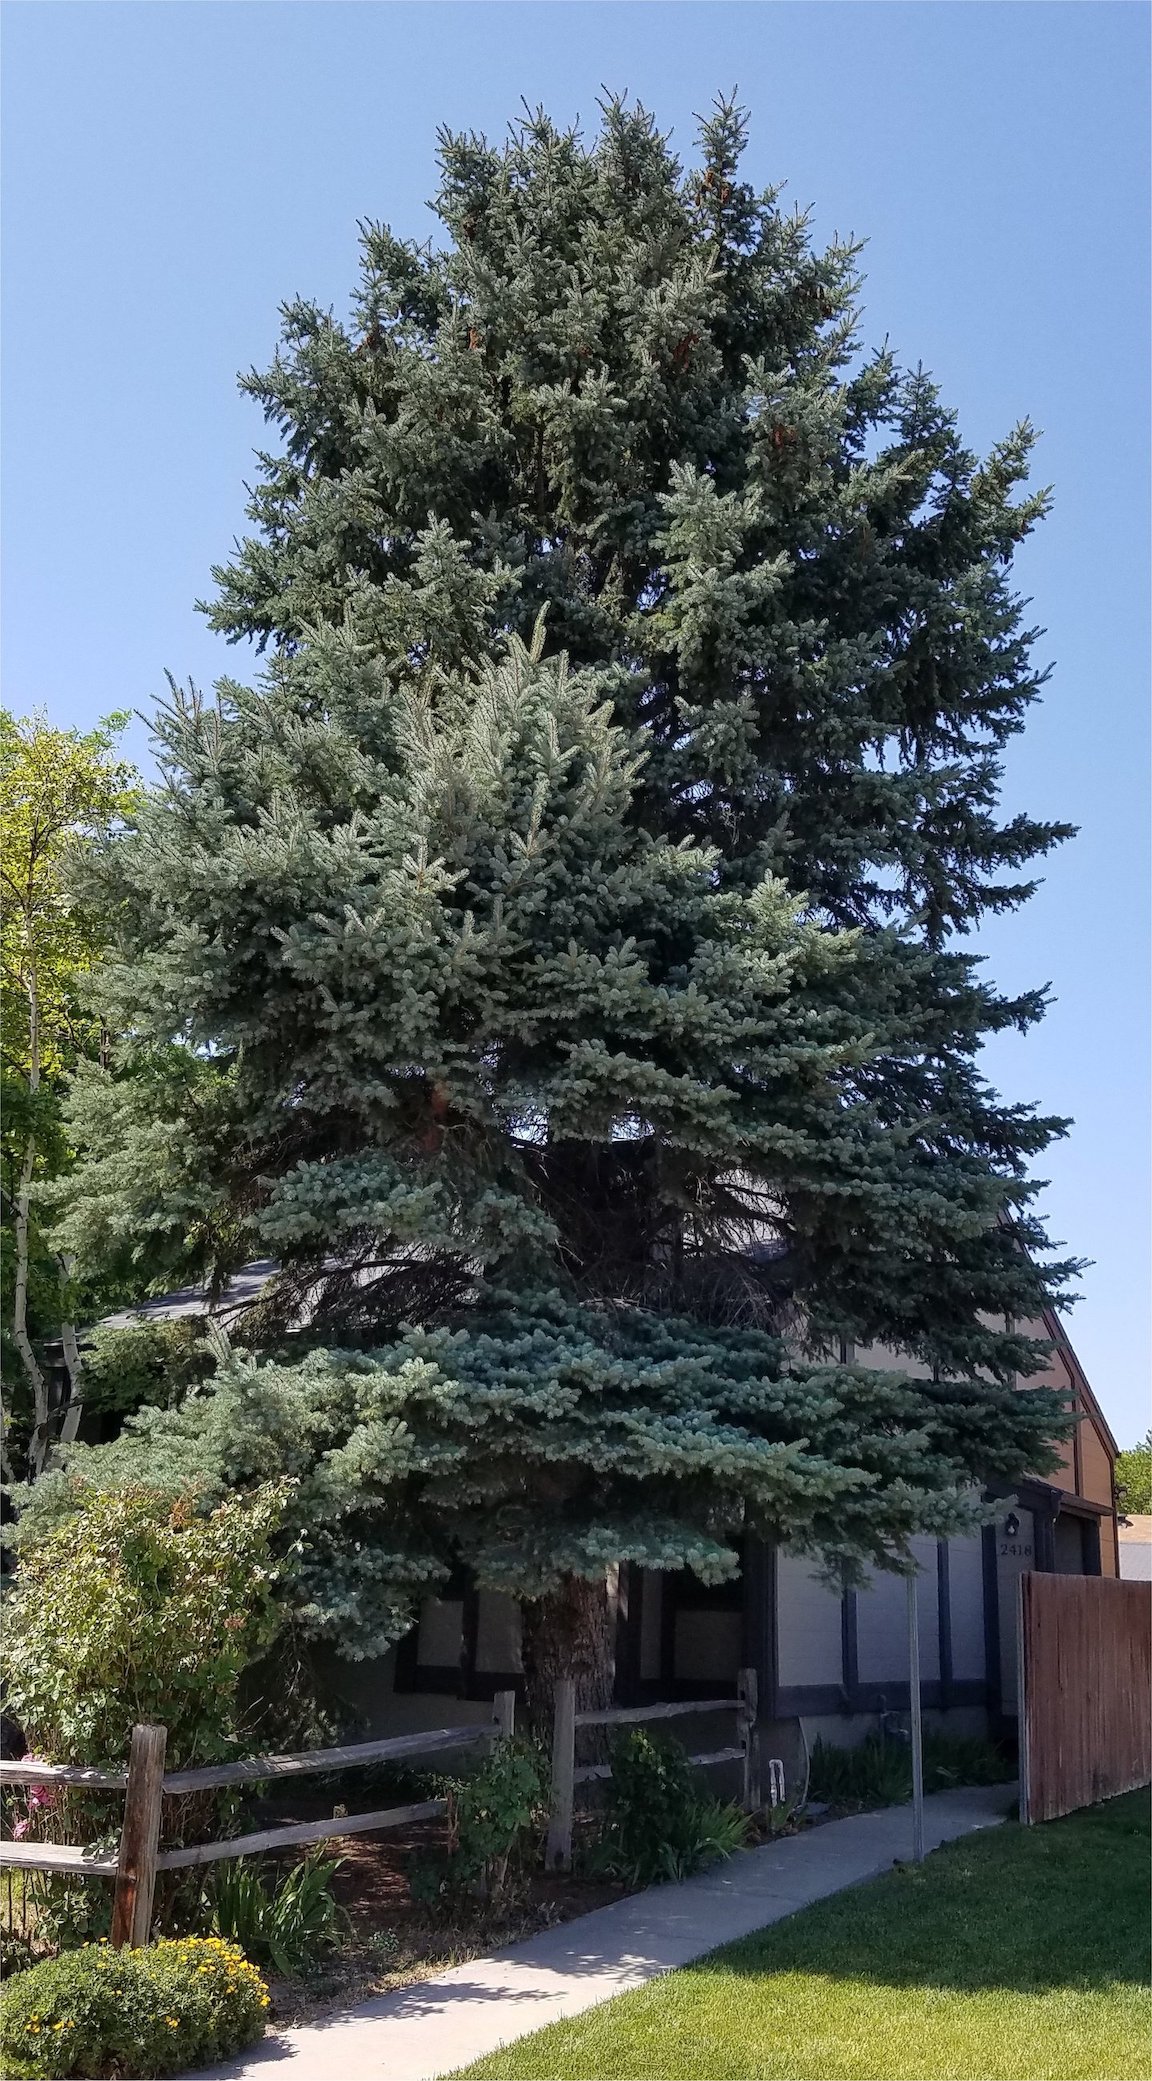 Blue Spruce in front of house